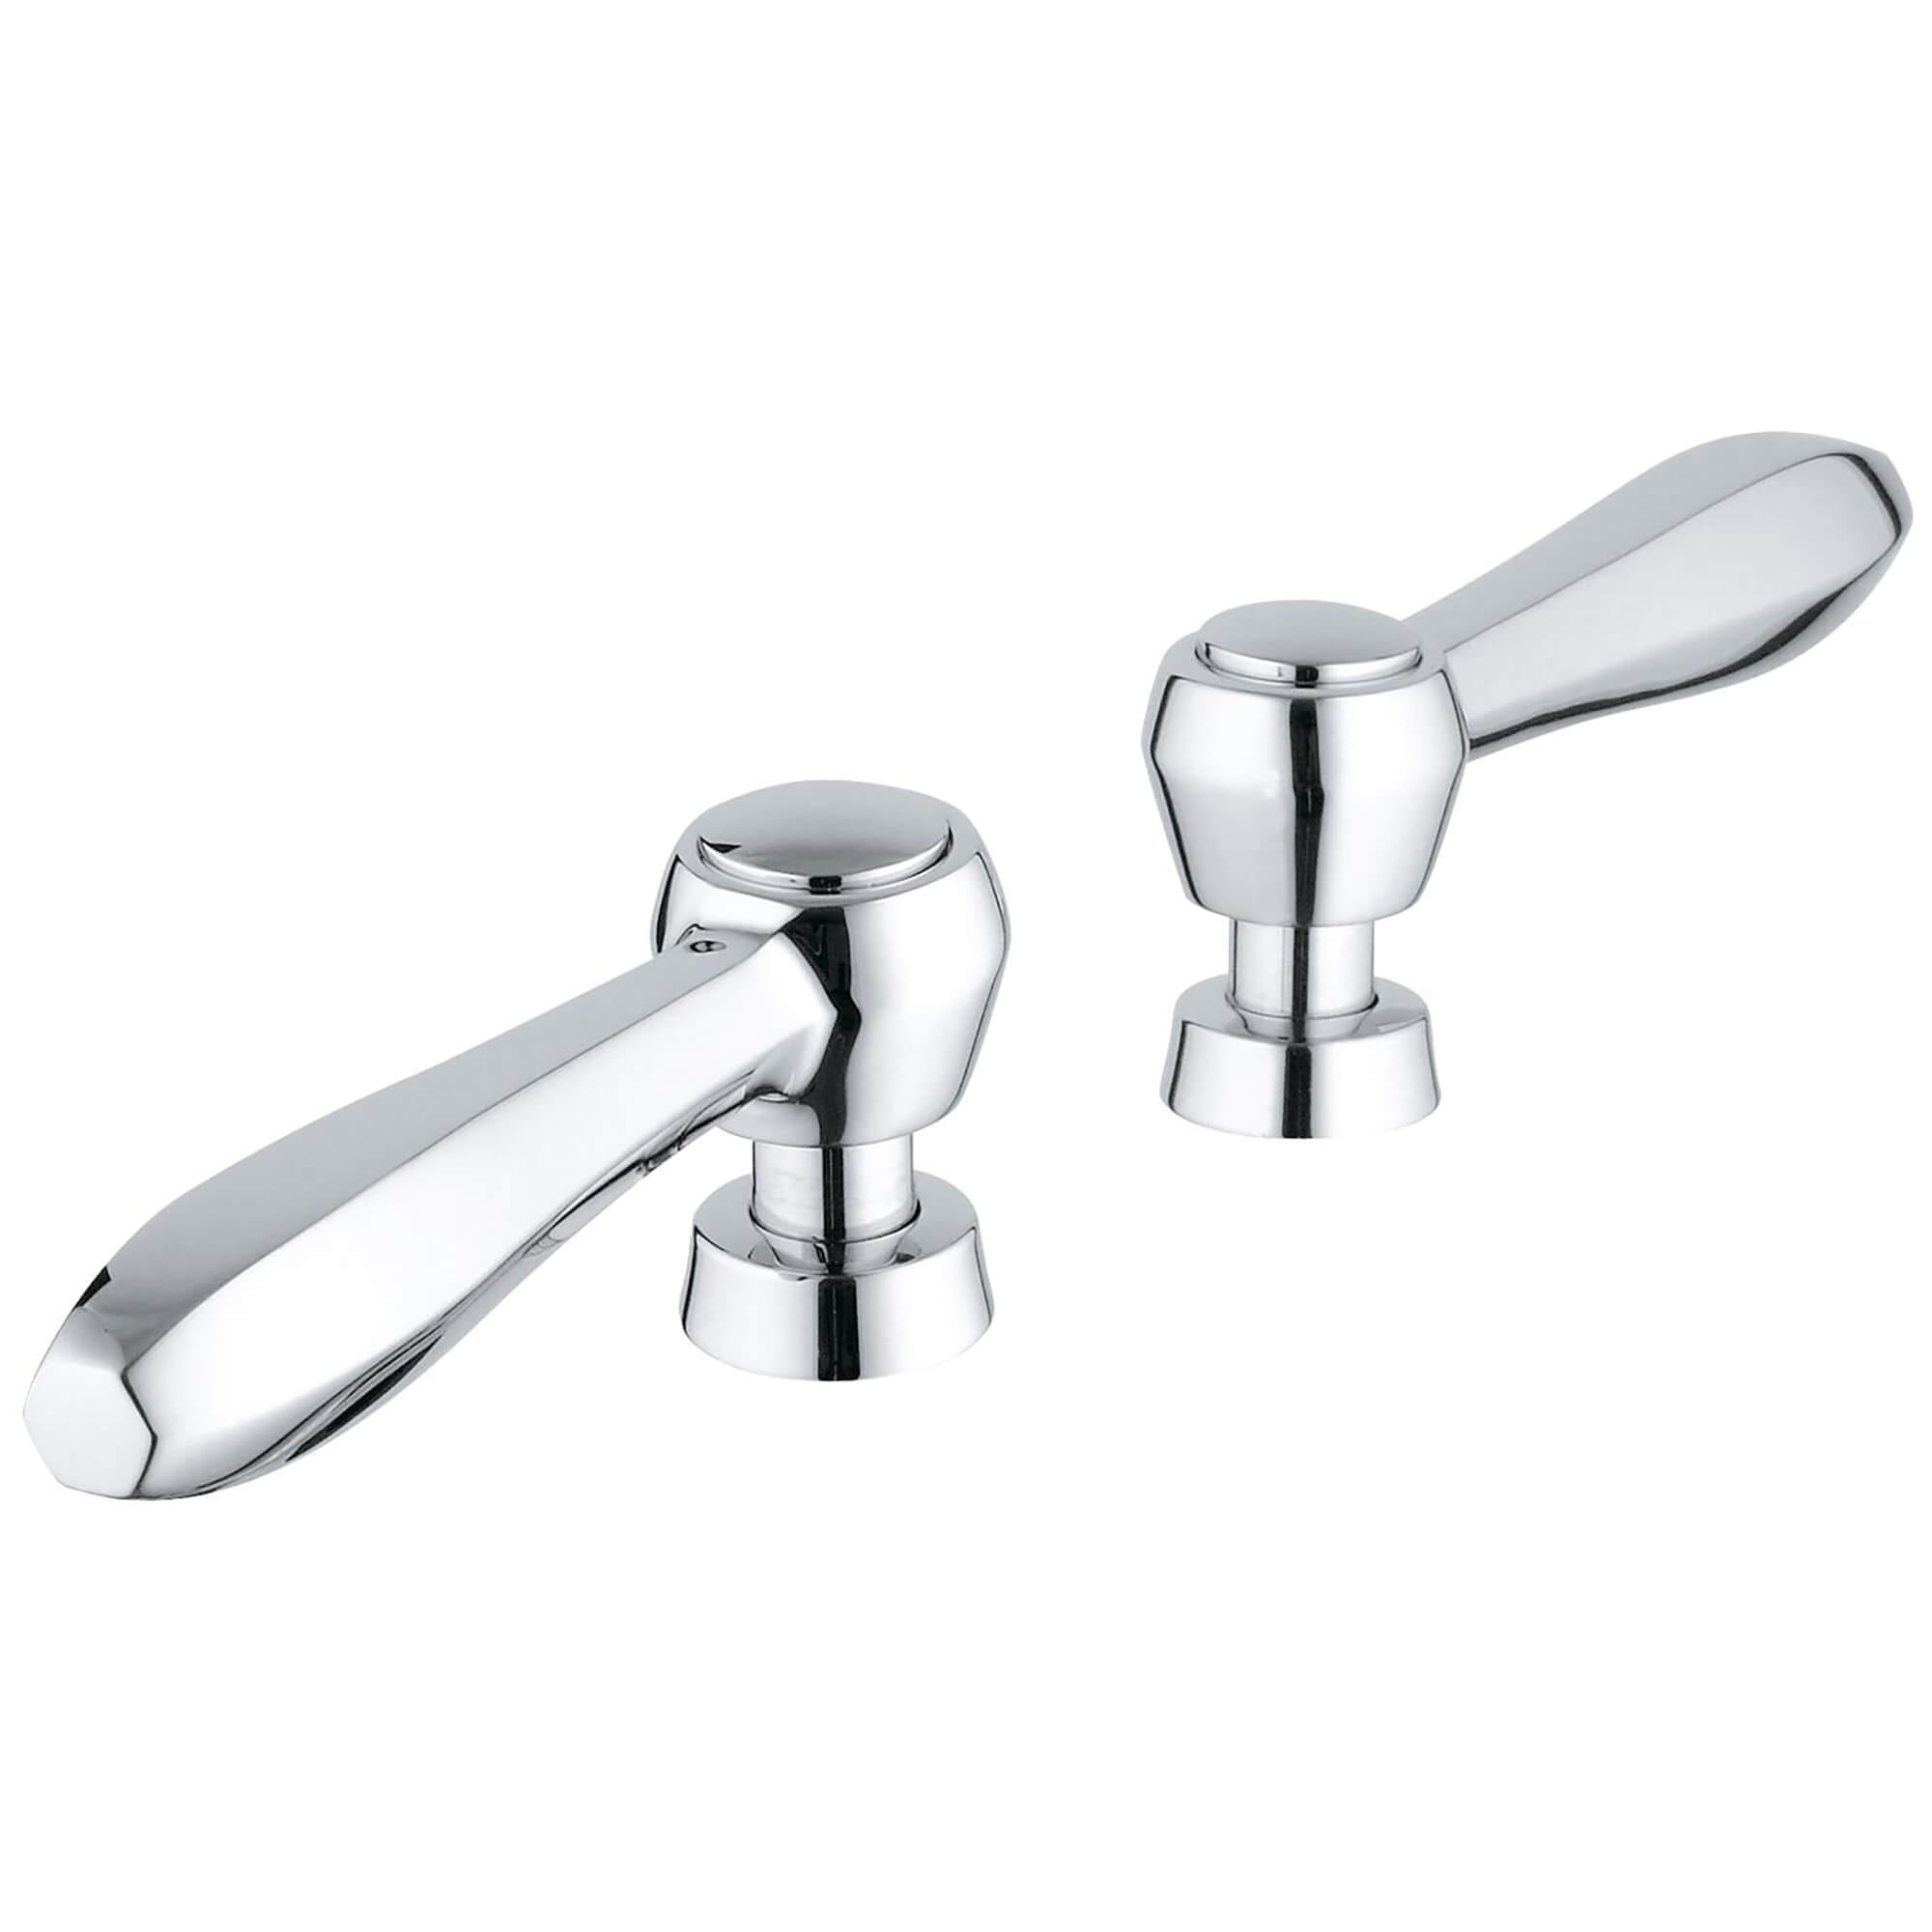 Lever Handles Pair GROHE CHROME